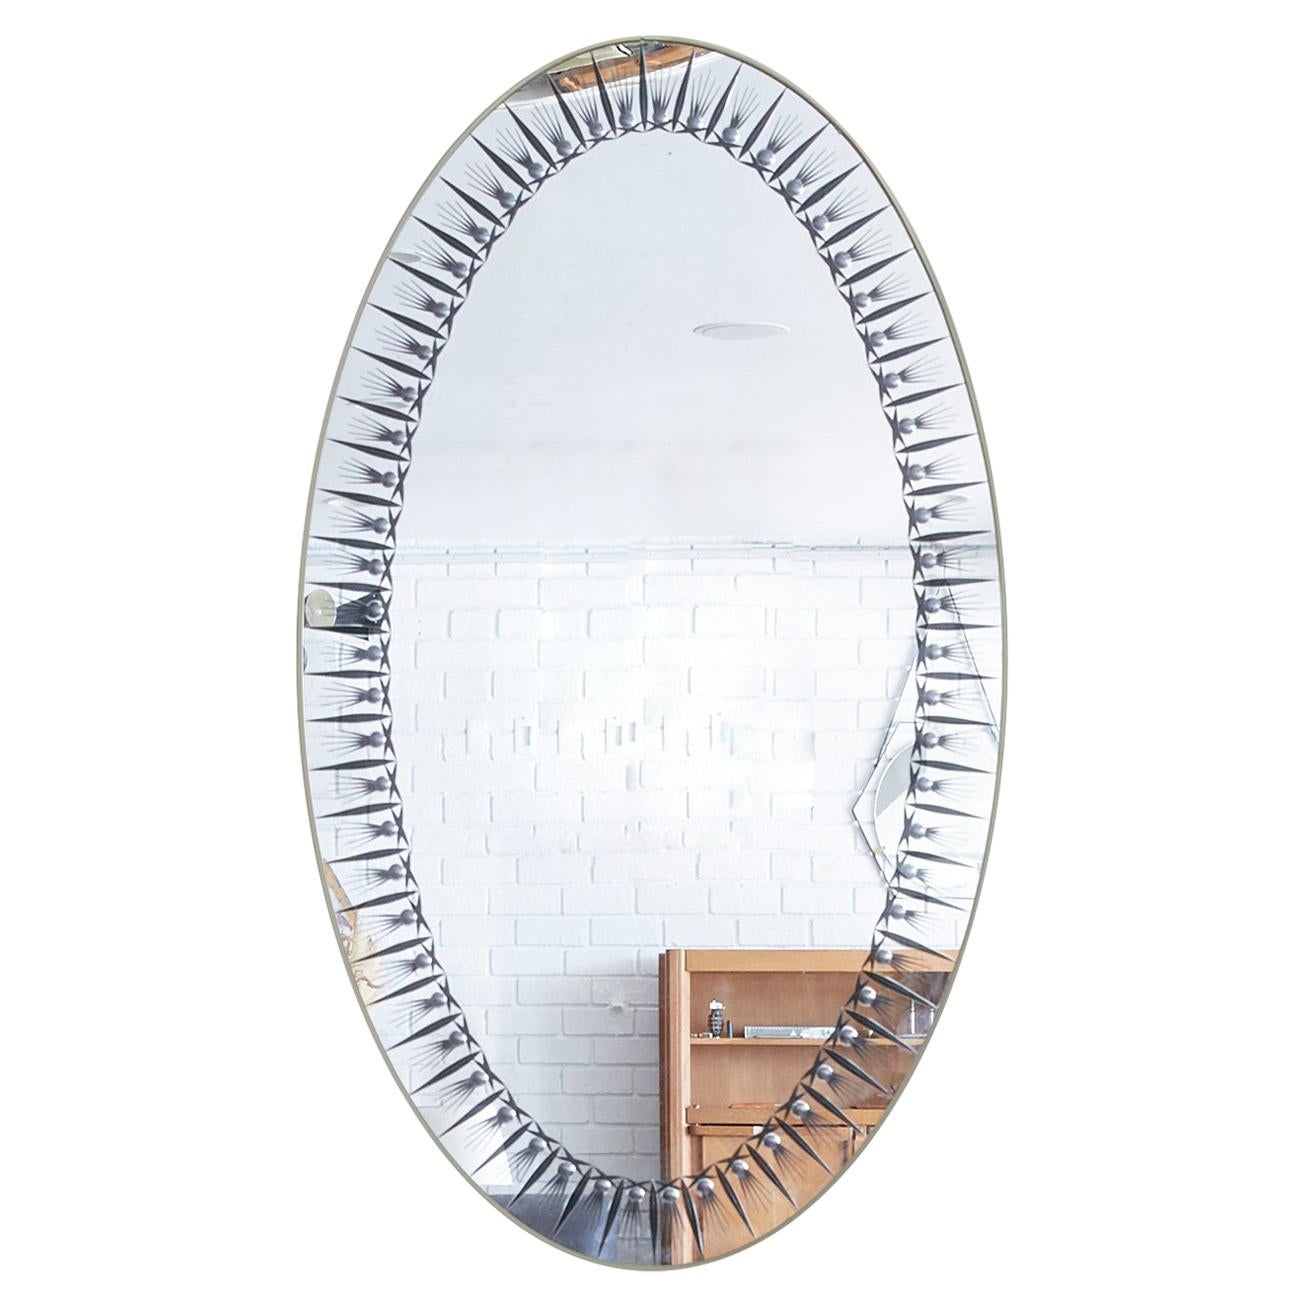 Gorgeous Cristal Arte oval mirror with grey frame border and brass trim. Beautiful patina throughout. Perfect bathroom vanity mirror!
   